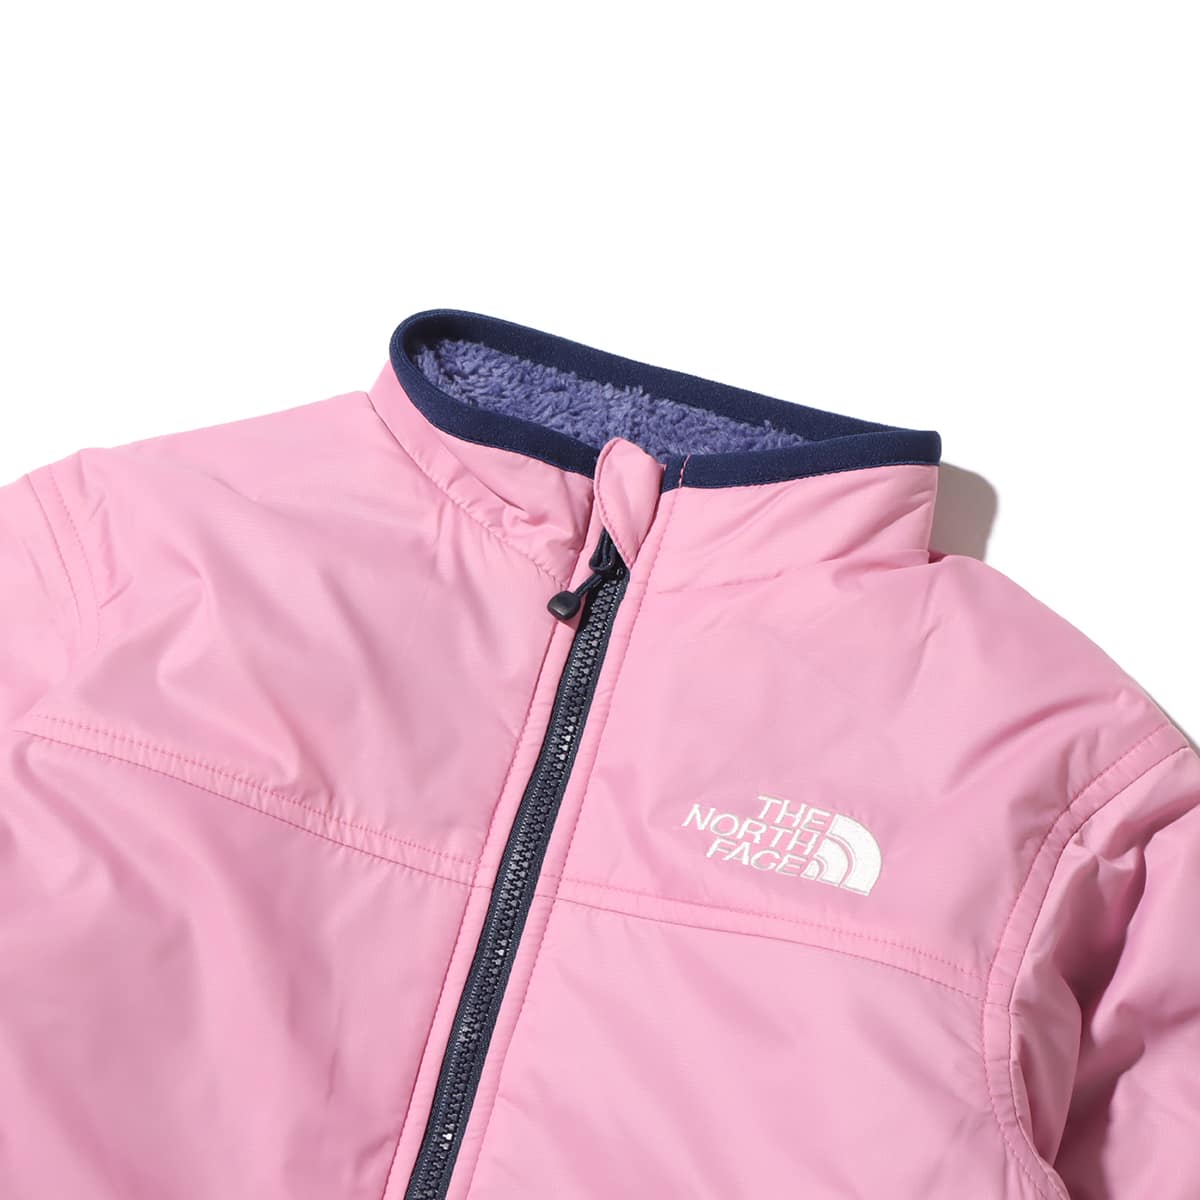 THE NORTH FACE REVERSIBLE COZY JACKET OCピンク 23FW-I